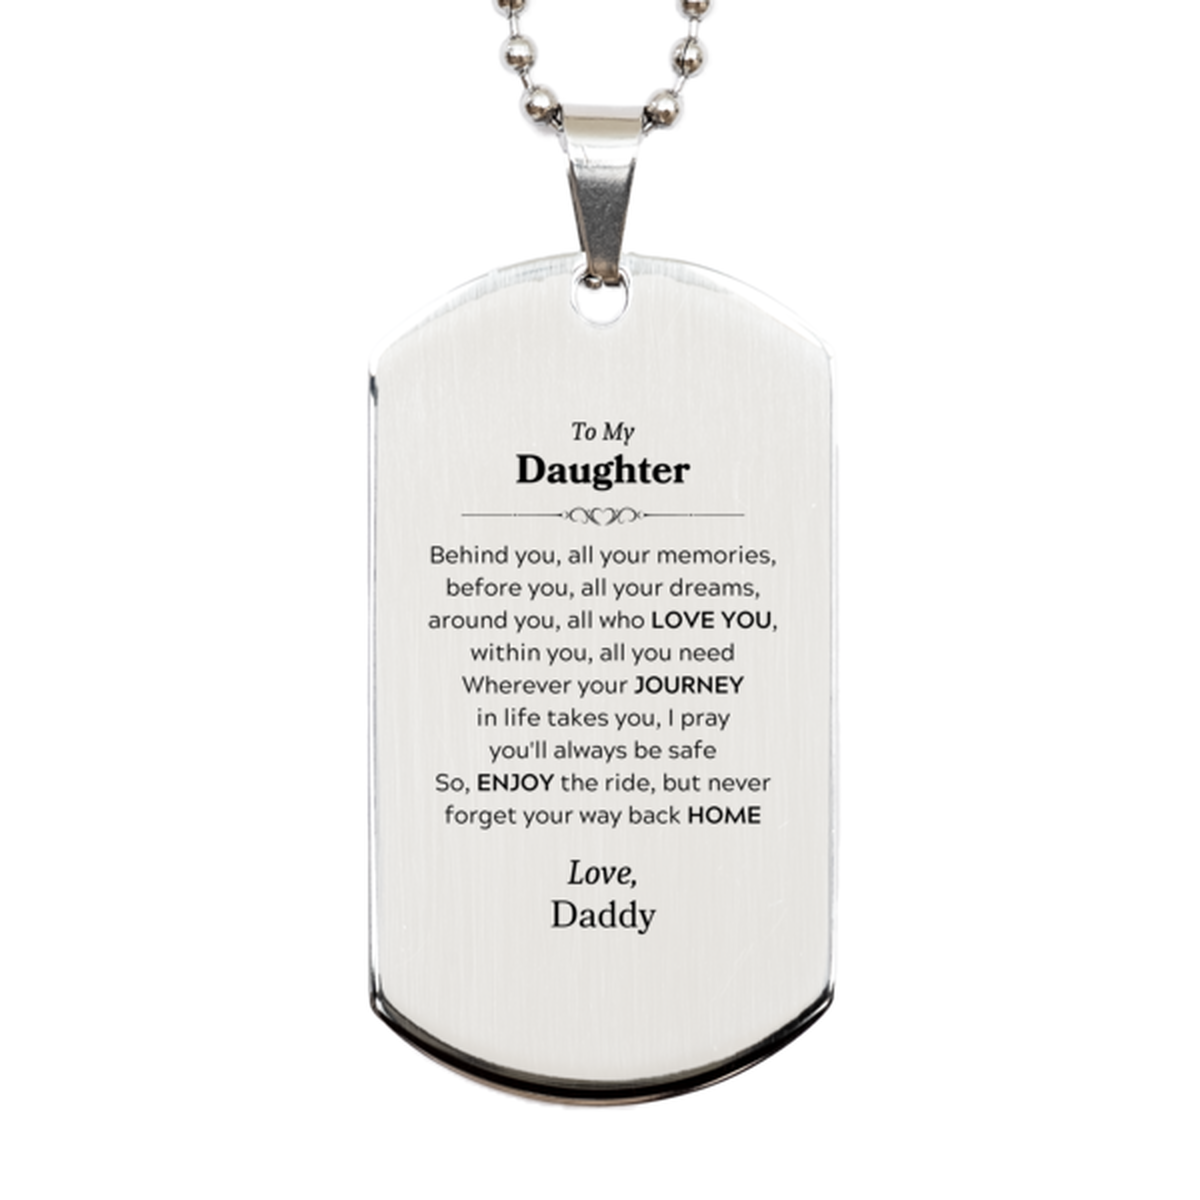 To My Daughter Graduation Gifts from Daddy, Daughter Silver Dog Tag Christmas Birthday Gifts for Daughter Behind you, all your memories, before you, all your dreams. Love, Daddy